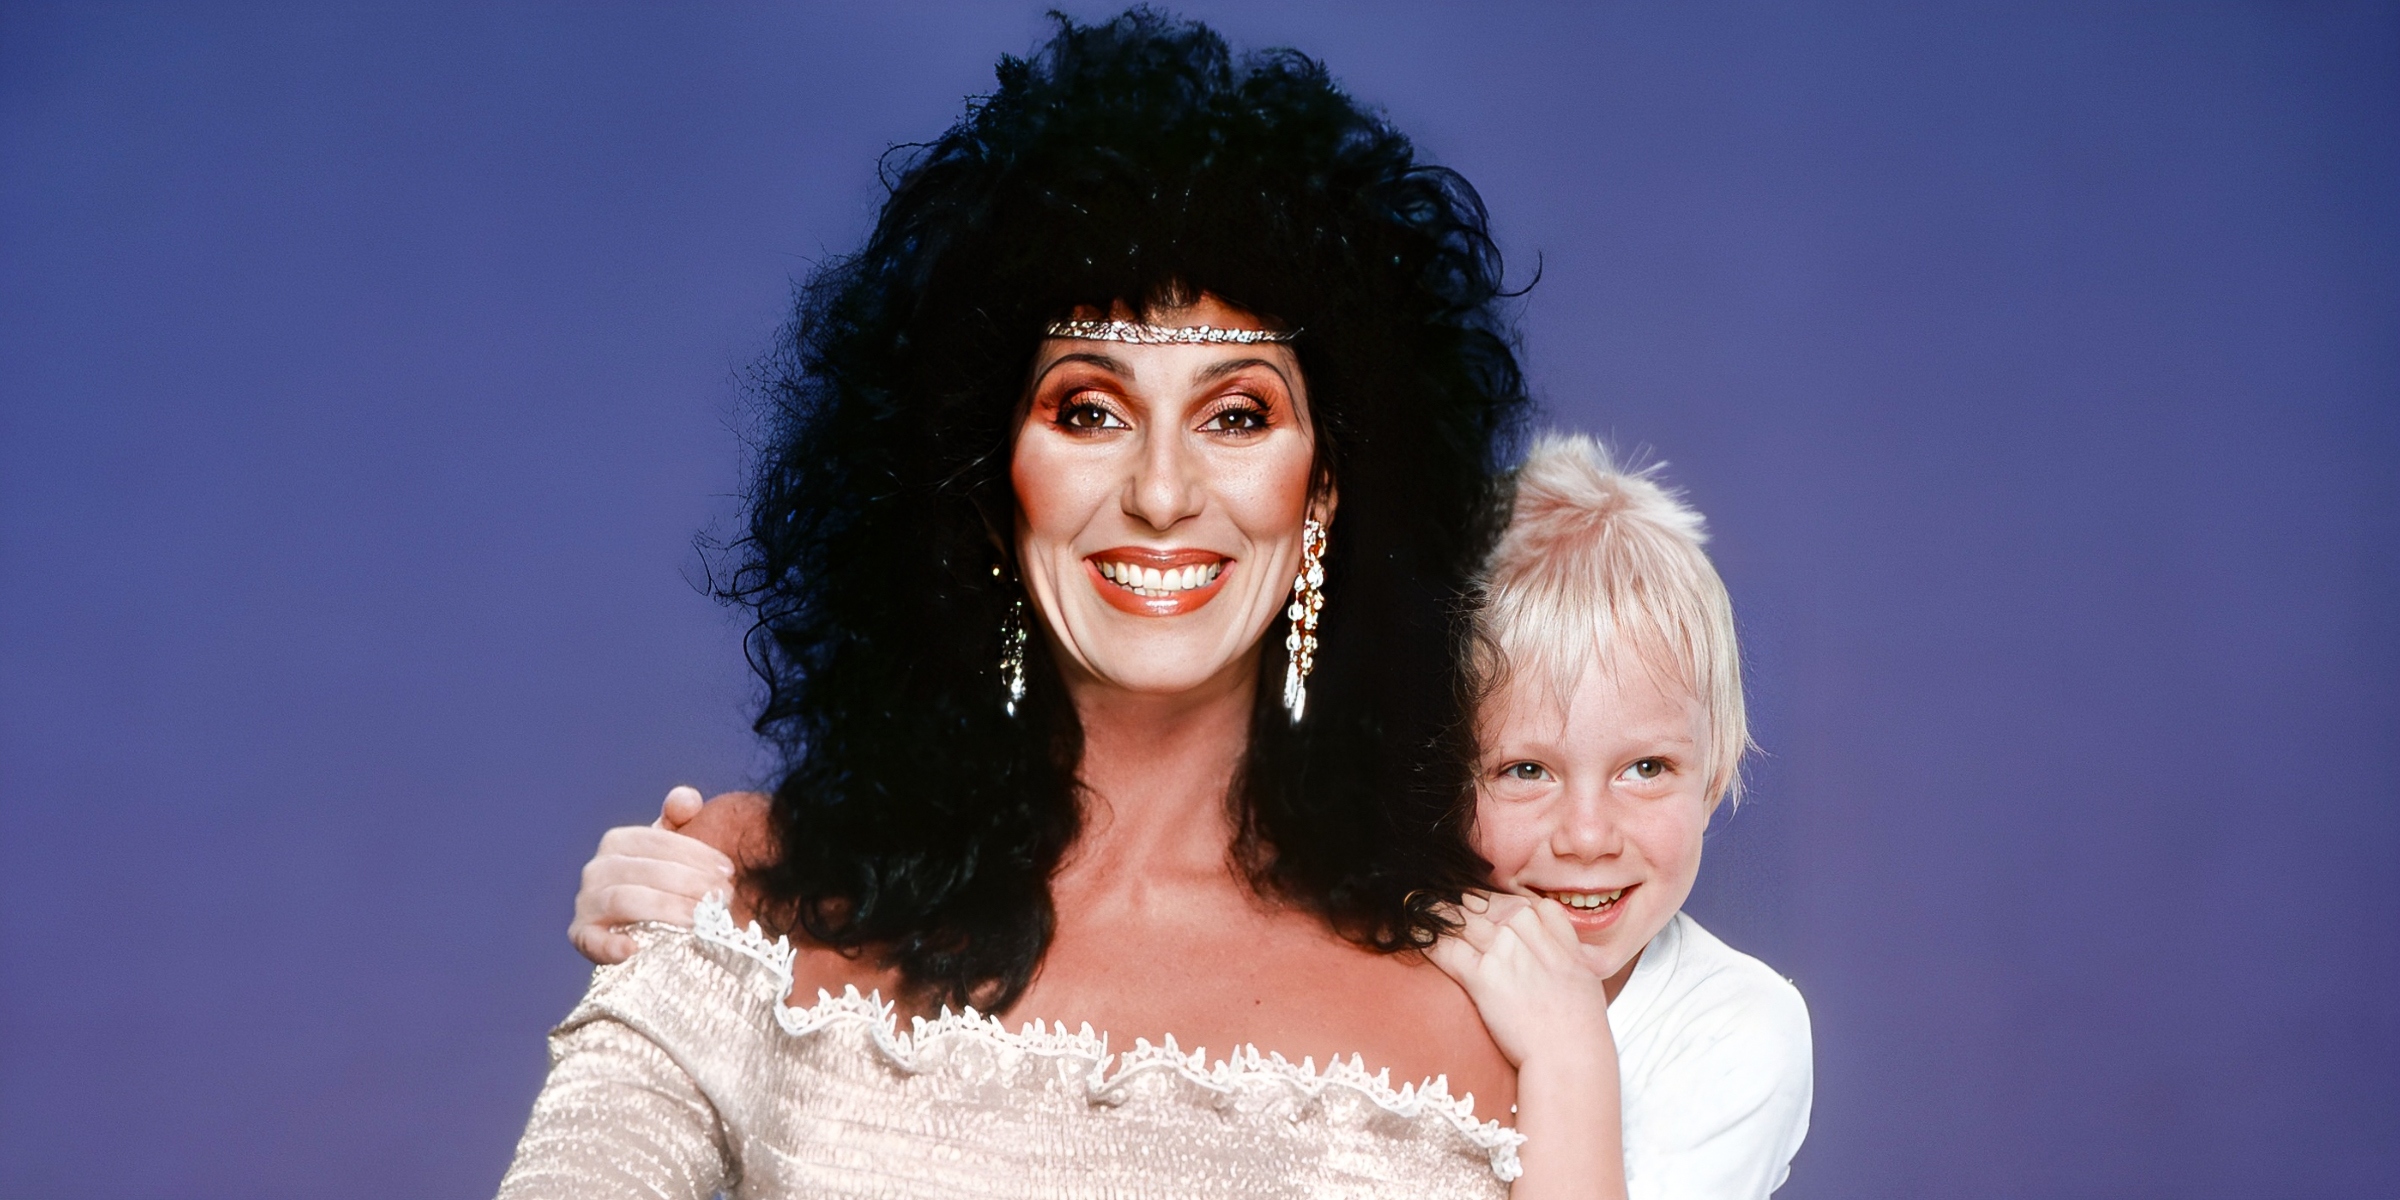 Cher and her son Elijah Blue Allman | Source: Getty Images